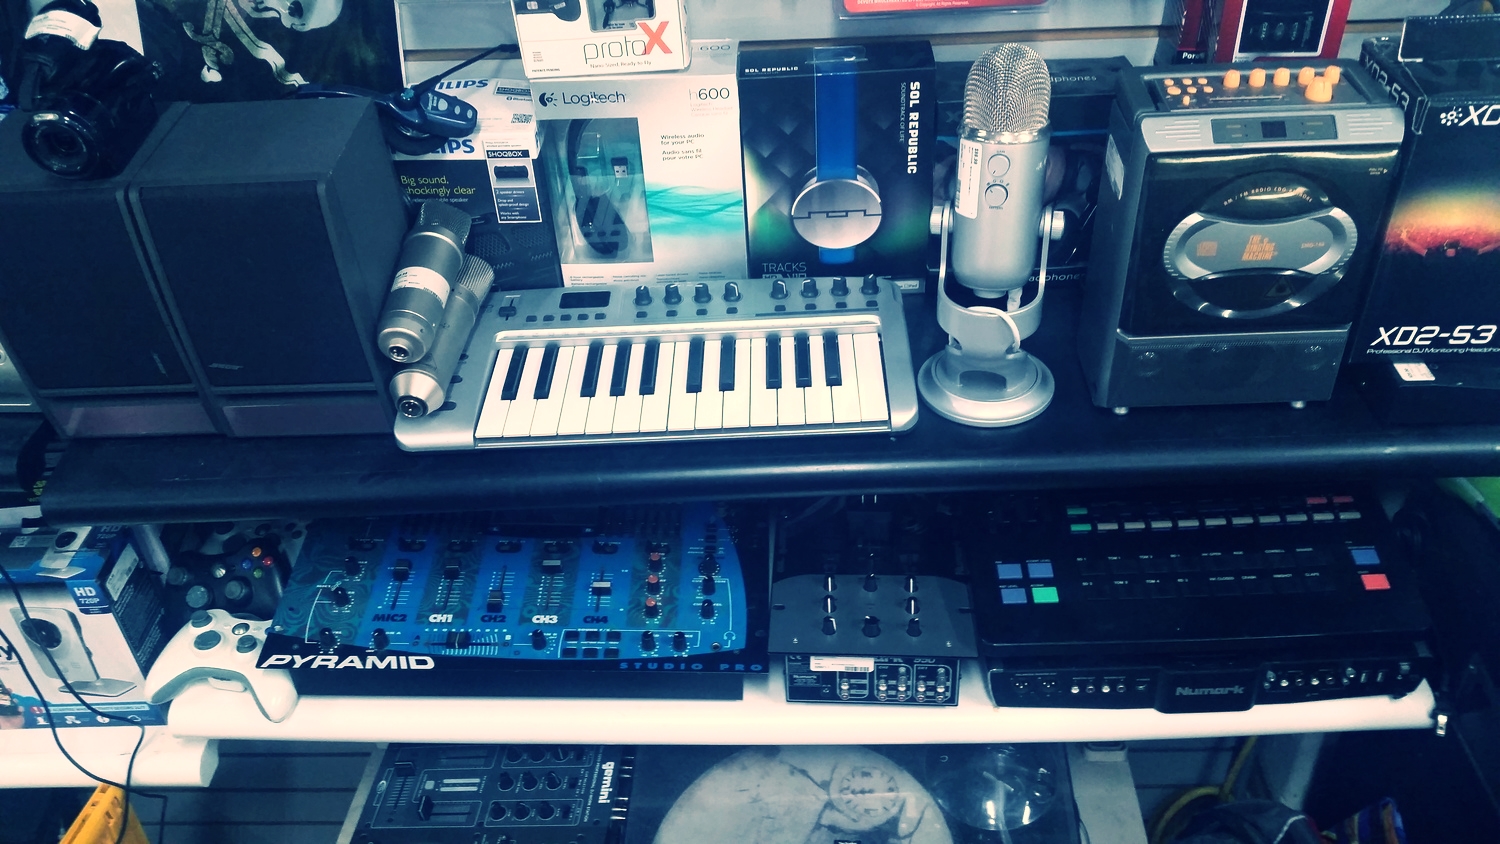 We carry mixers, keyboards, microphones, EQ and compression interfaces,